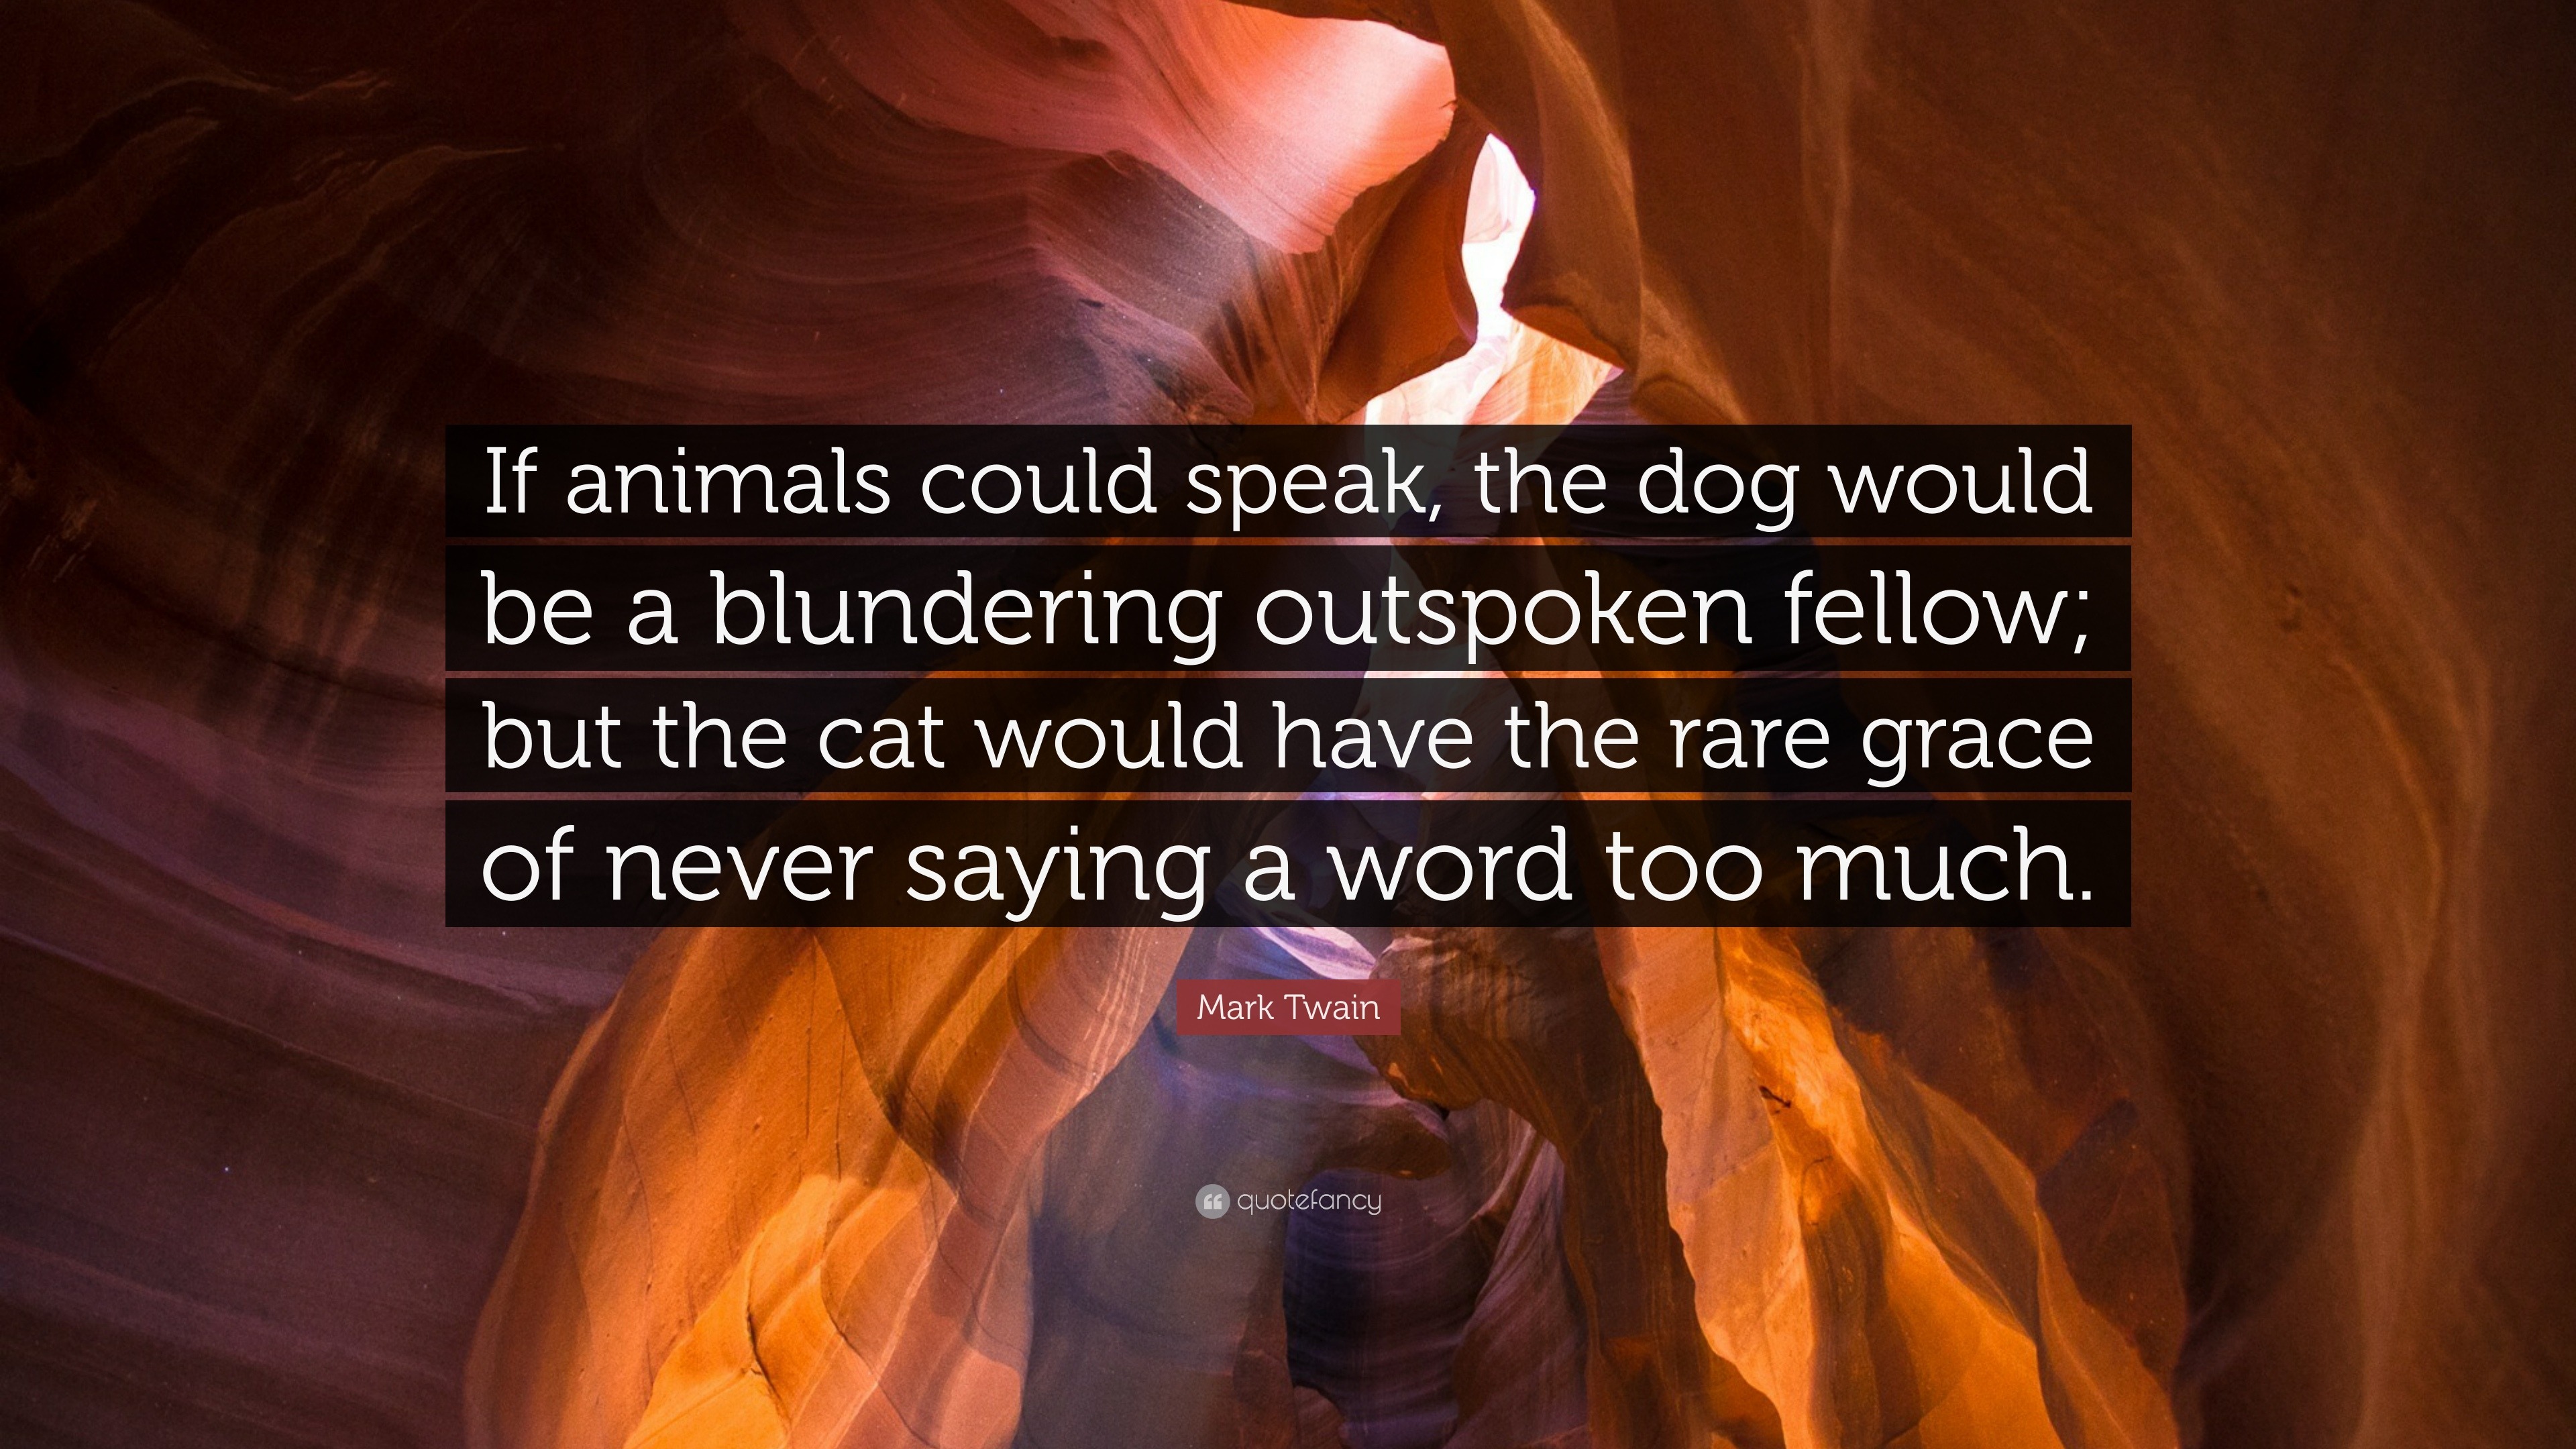 If animals could speak, the dog would be a blundering outspoken